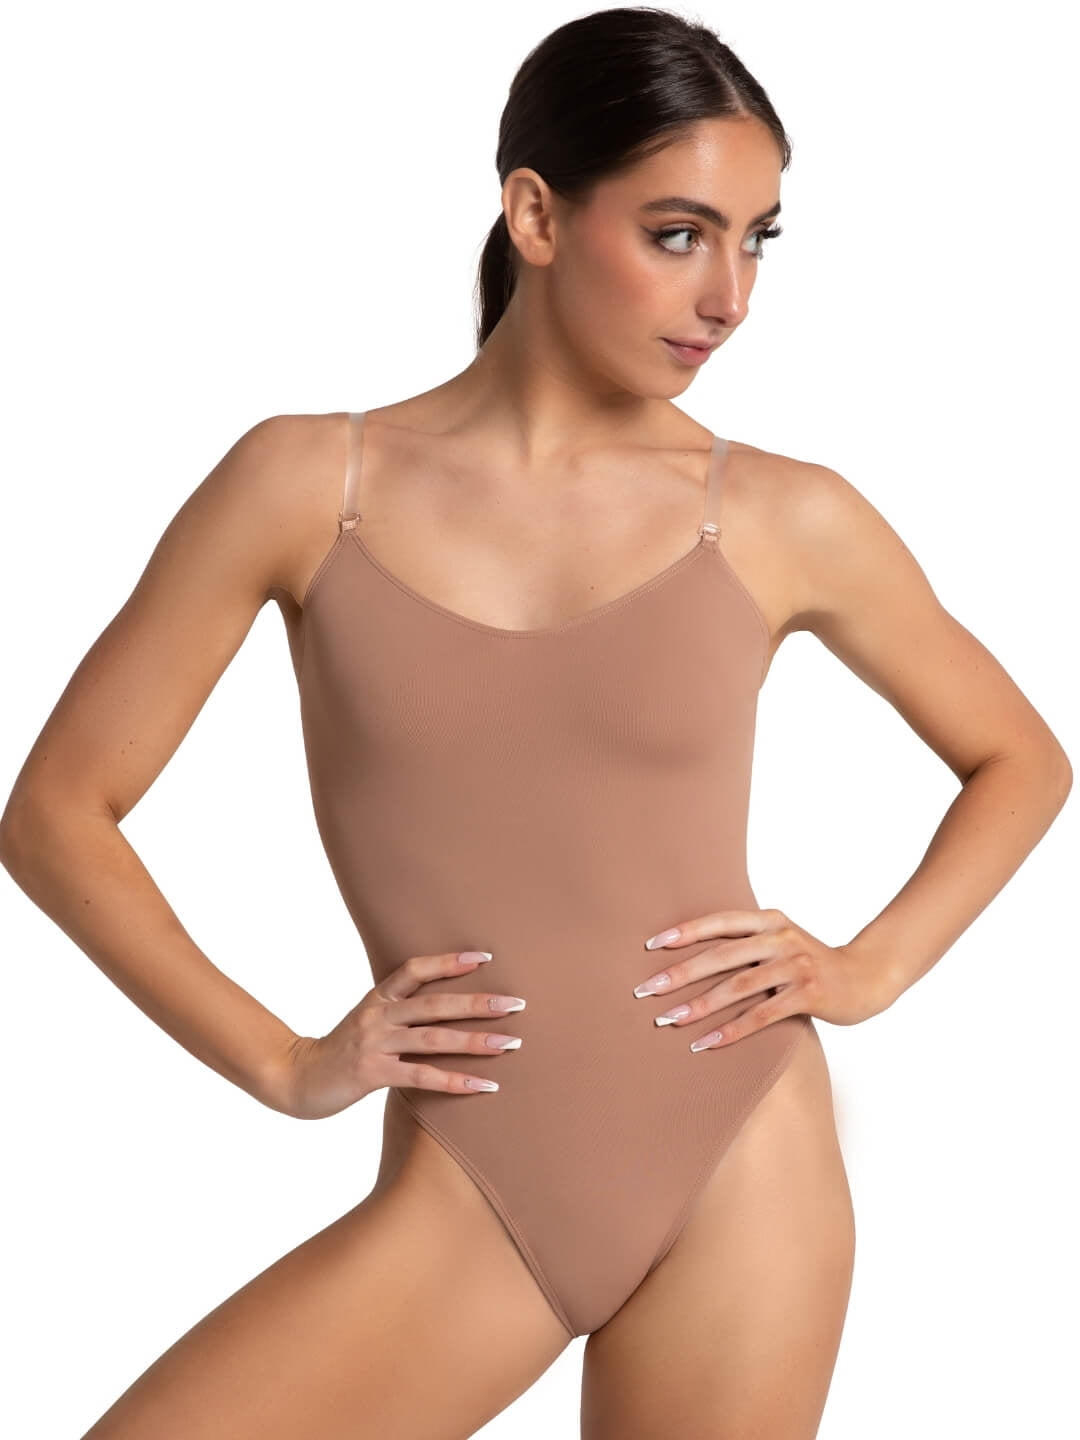 Camisole Leotard w/See-Through Straps by Body Wrappers : 266, On